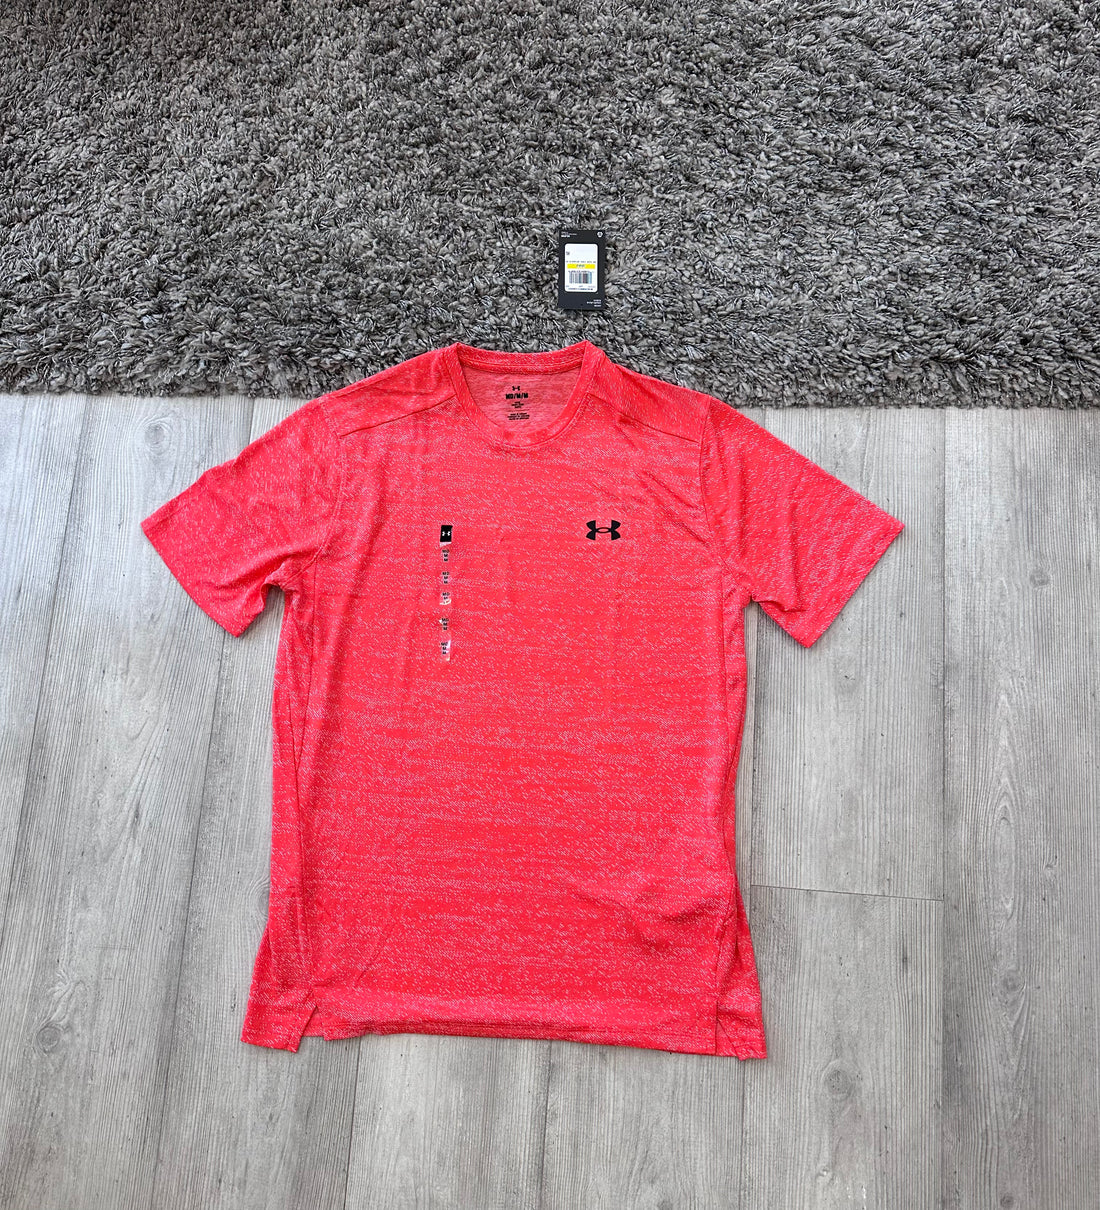 UNDER ARMOUR VENT T SHIRT - RED